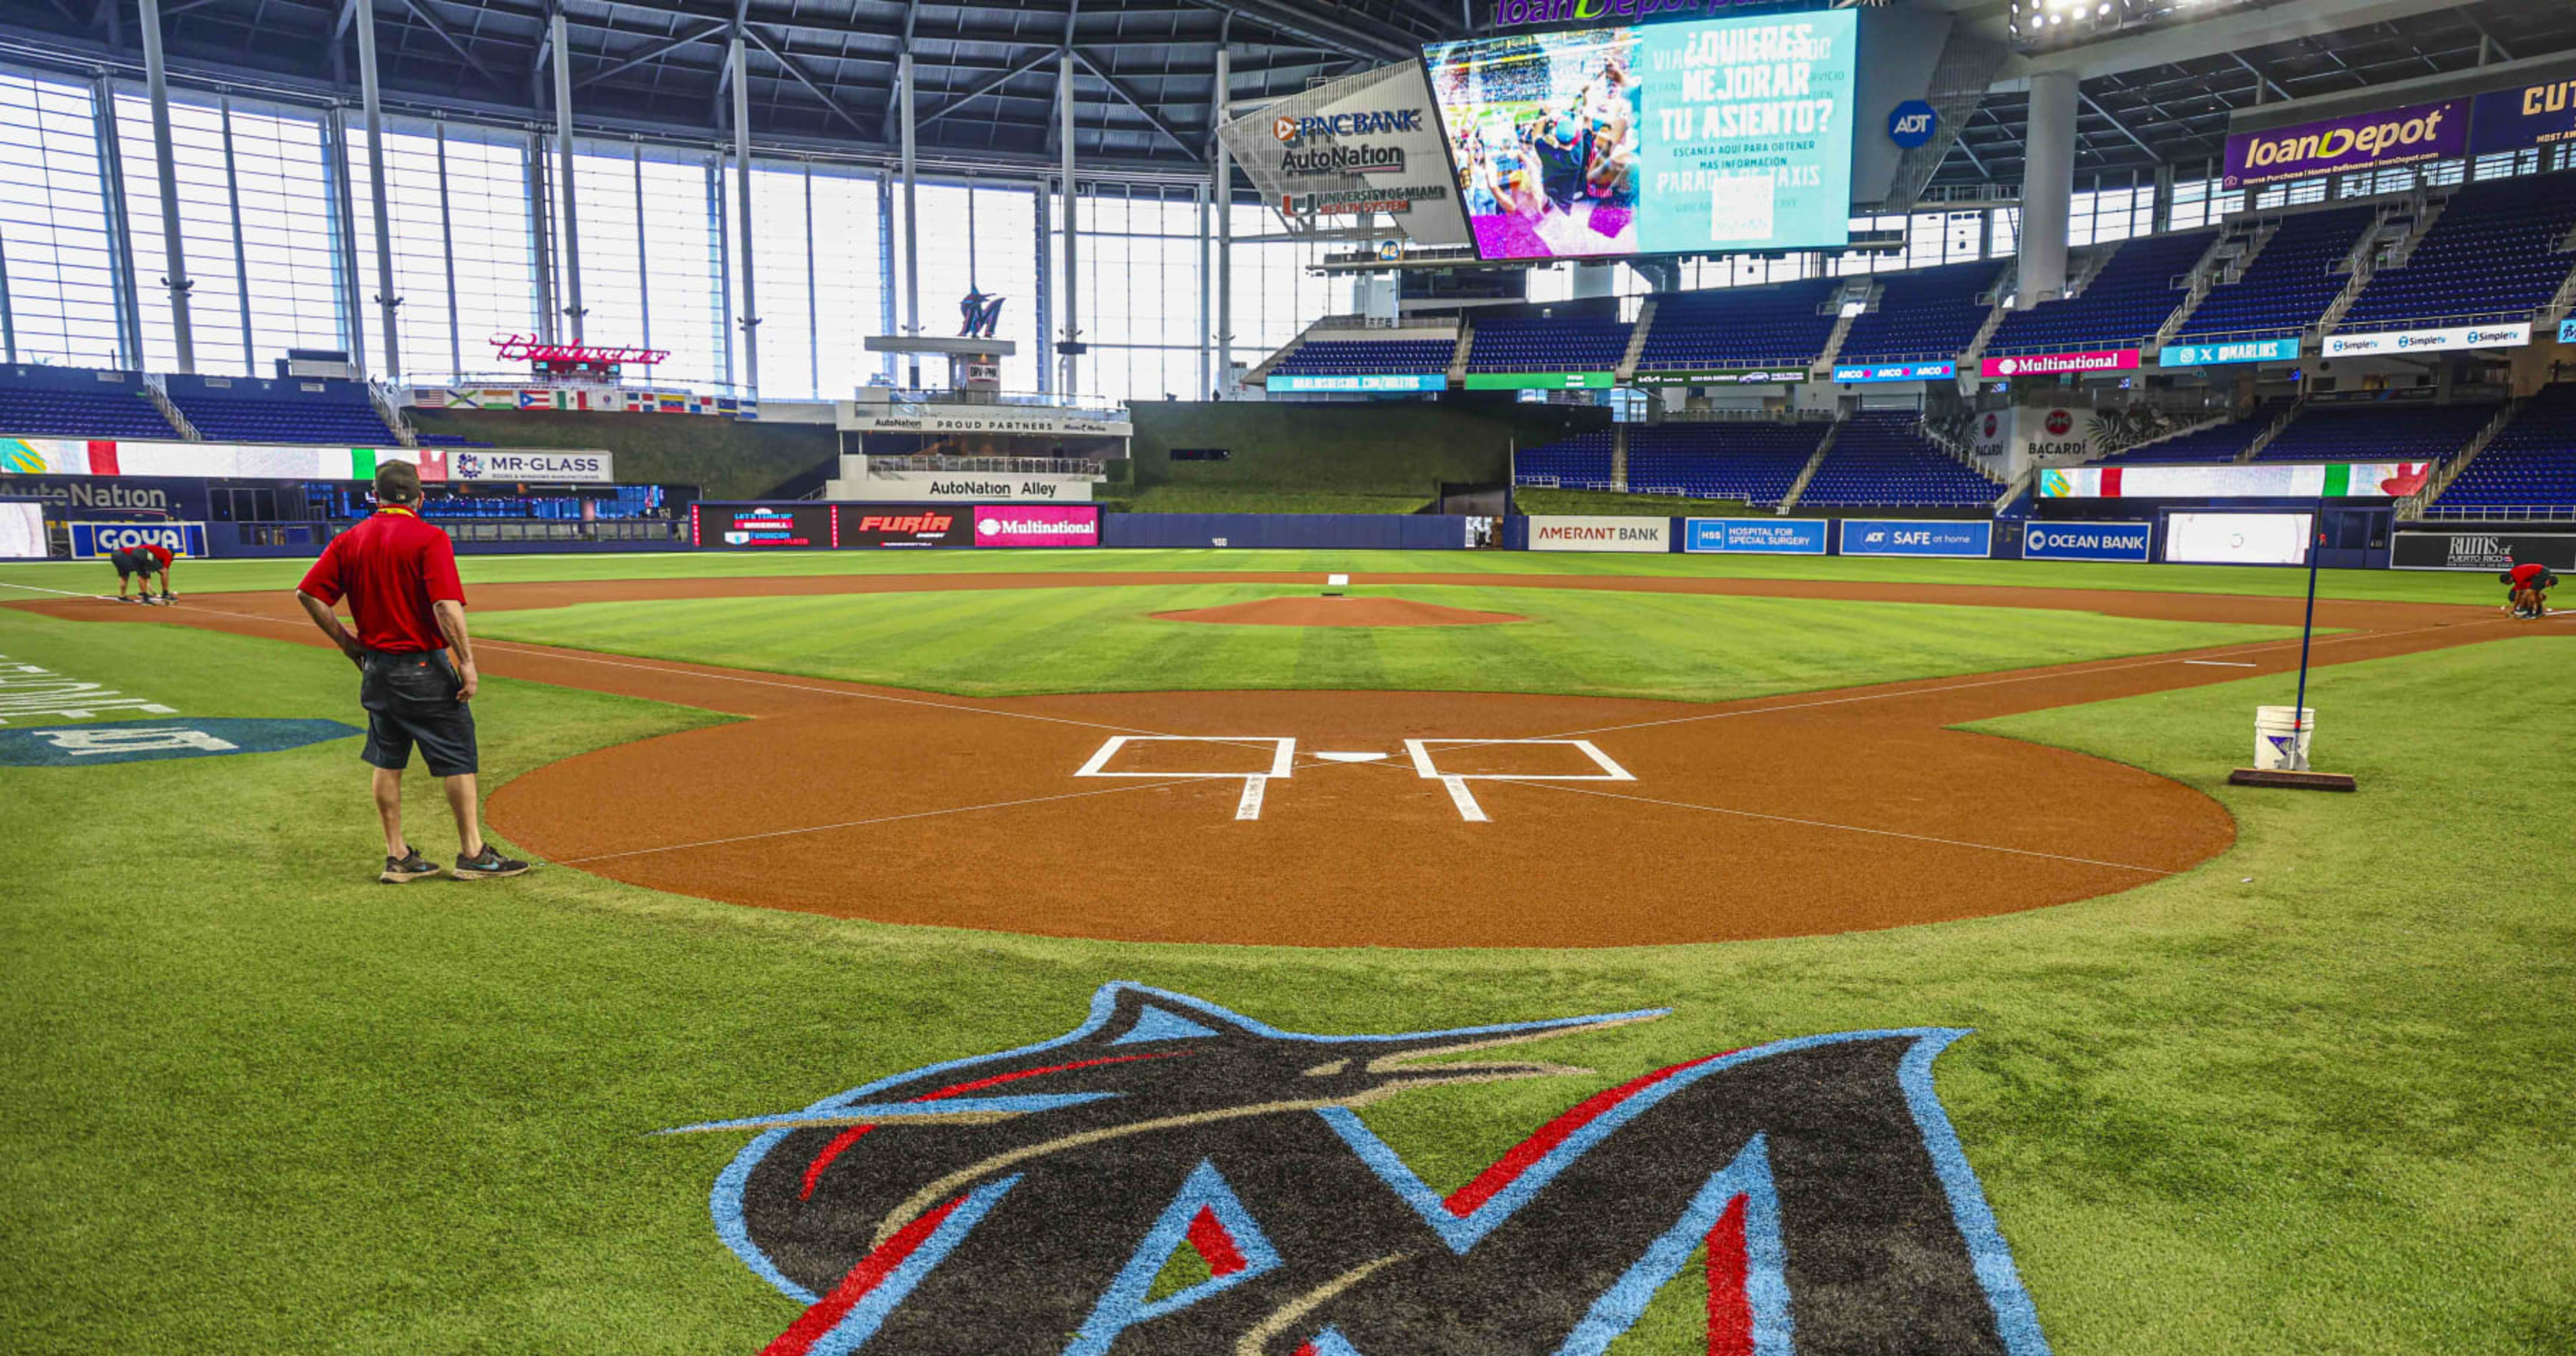 2026 World Baseball Classic Venues Announced by MLB; Miami to Host Championship Game